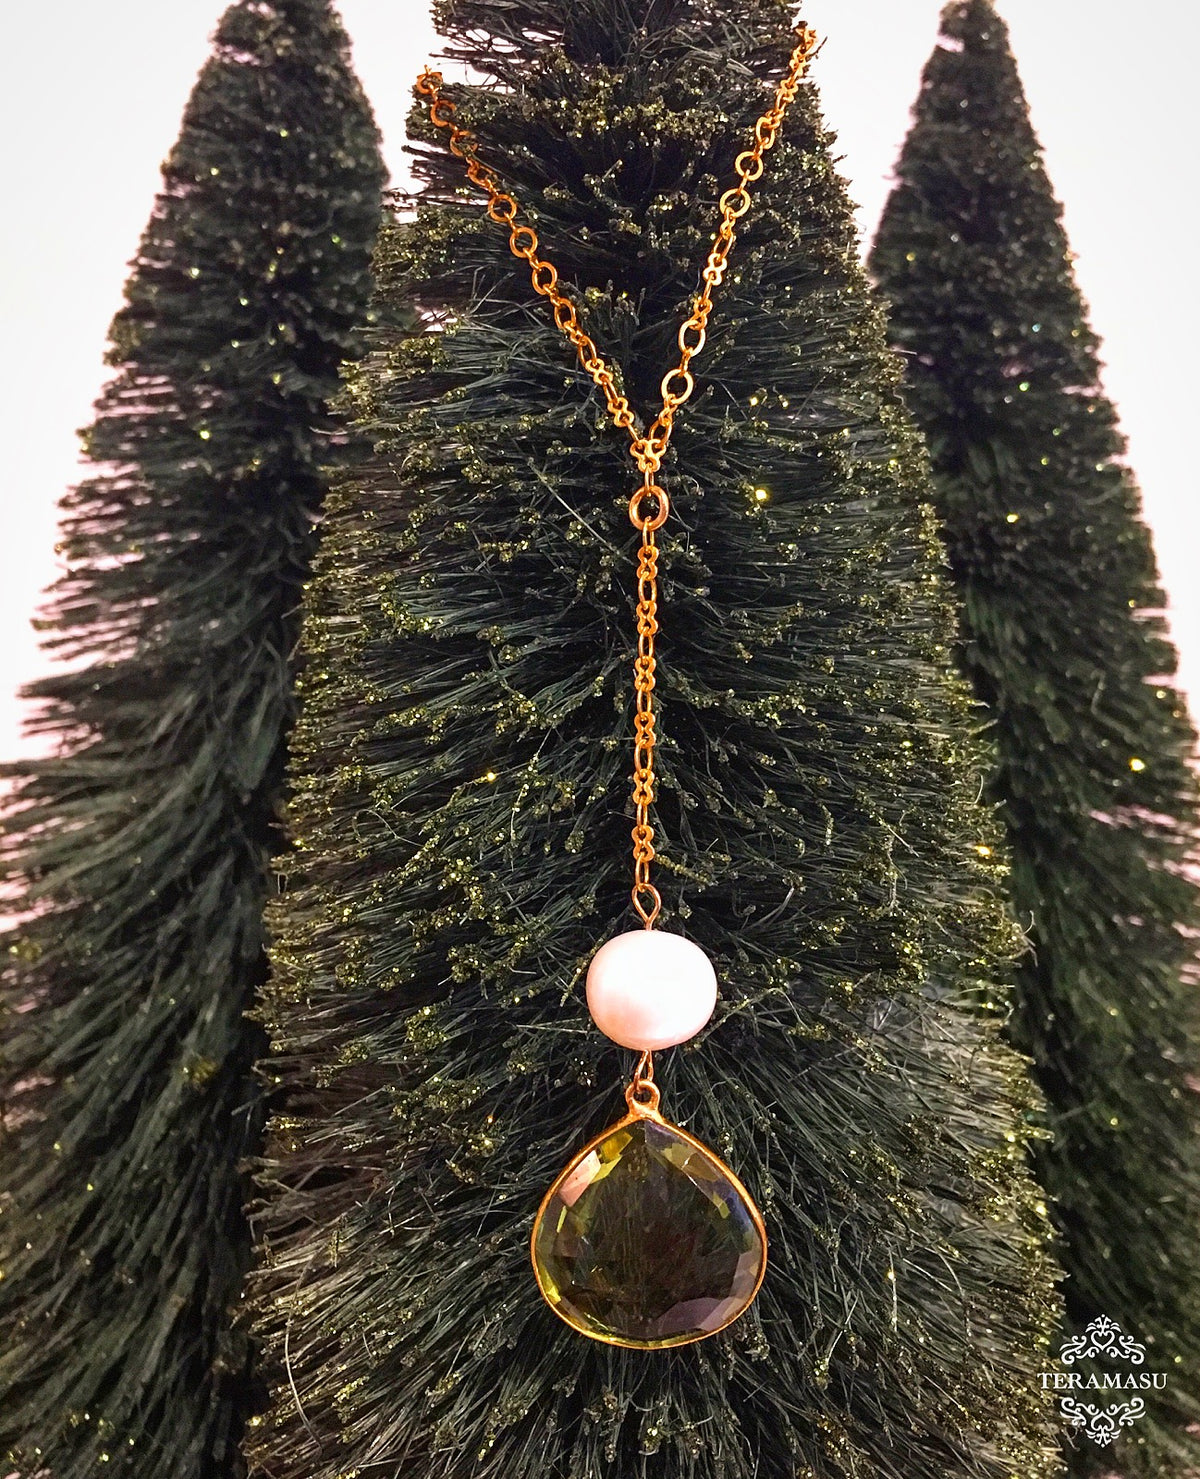 Friday Favorite: Gorgeous & New, Handmade Designer Teramasu Green Amethyst & Pearl Drop on Y Chain Gold Necklace